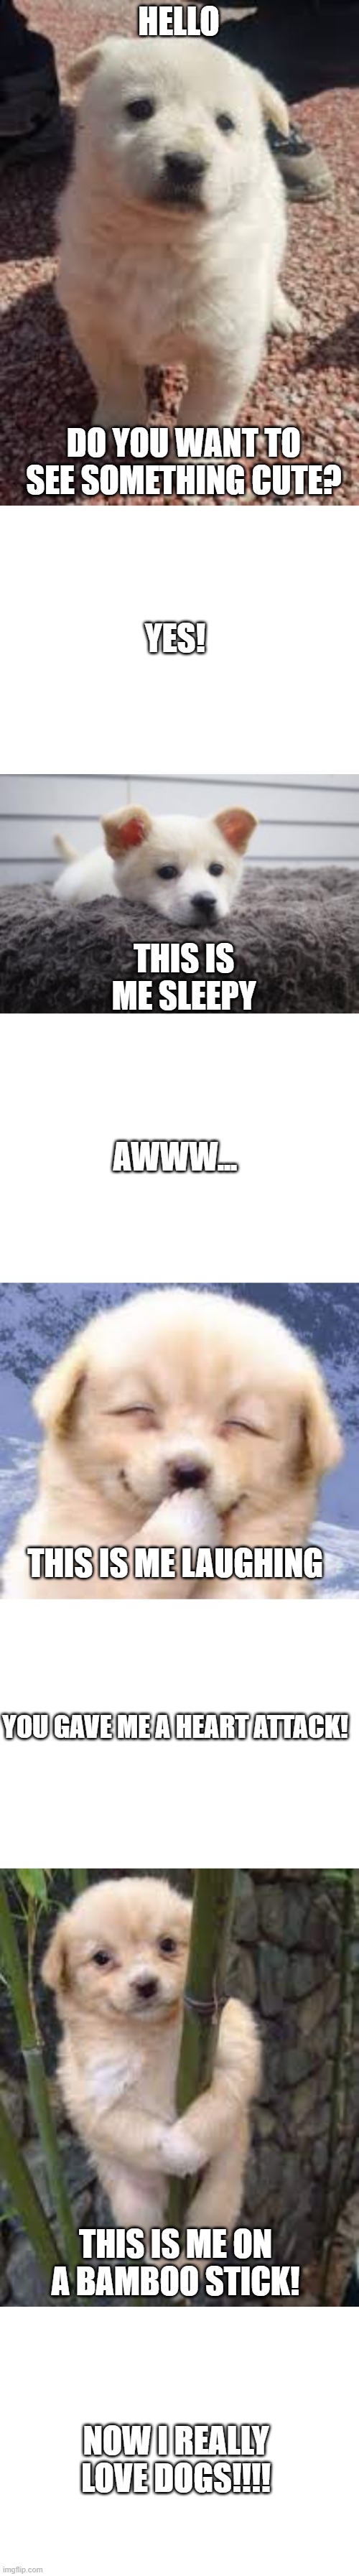 HELLO; DO YOU WANT TO SEE SOMETHING CUTE? YES! THIS IS ME SLEEPY; AWWW... THIS IS ME LAUGHING; YOU GAVE ME A HEART ATTACK! THIS IS ME ON A BAMBOO STICK! NOW I REALLY LOVE DOGS!!!! | image tagged in blank white template | made w/ Imgflip meme maker